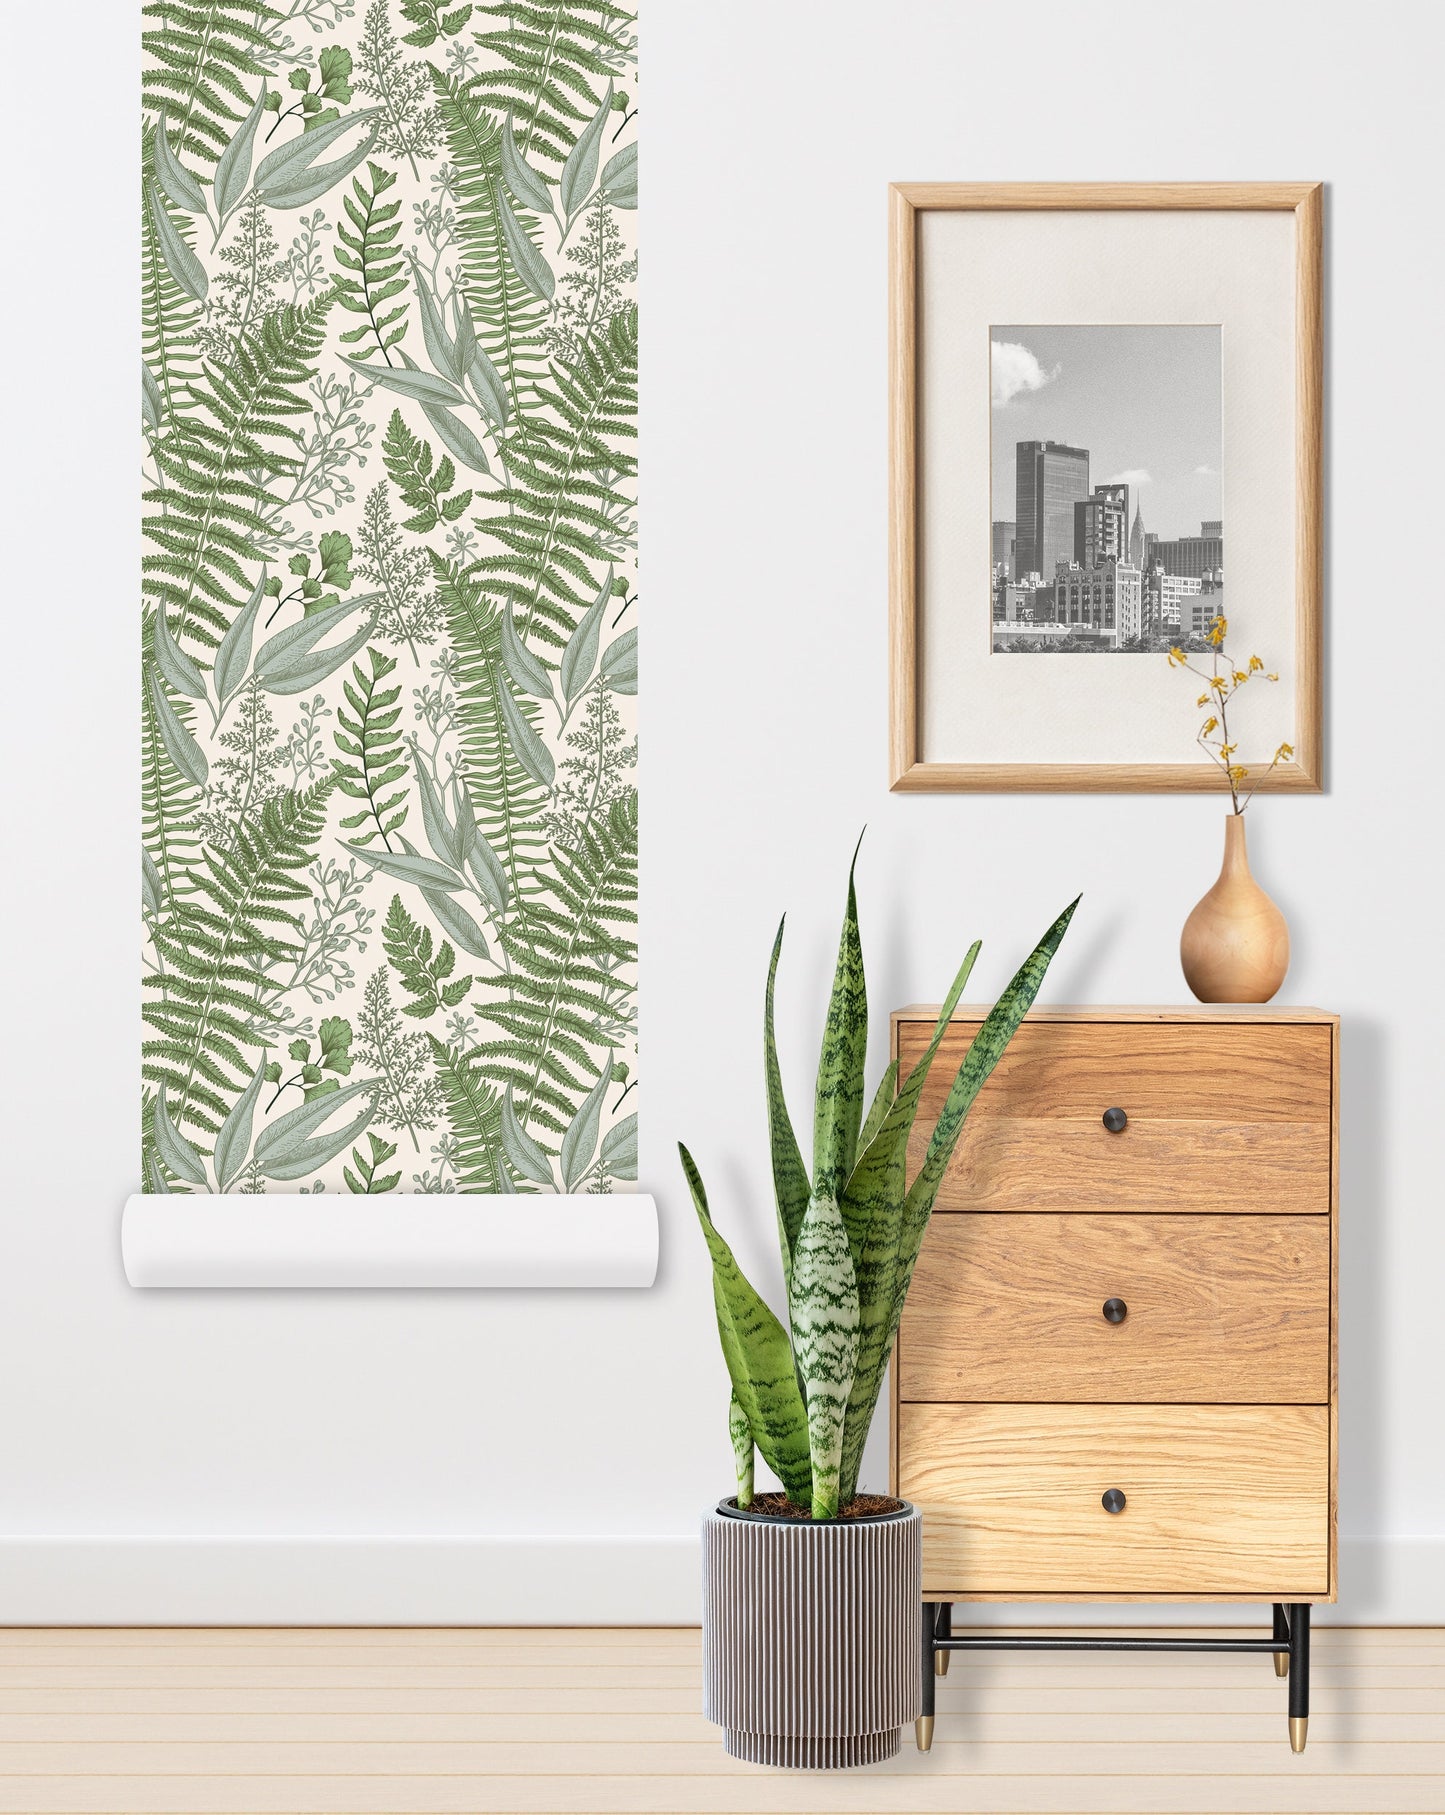 Removable Wallpaper Peel and Stick Wallpaper Mural Vintage Fern Leaves Wall Paper